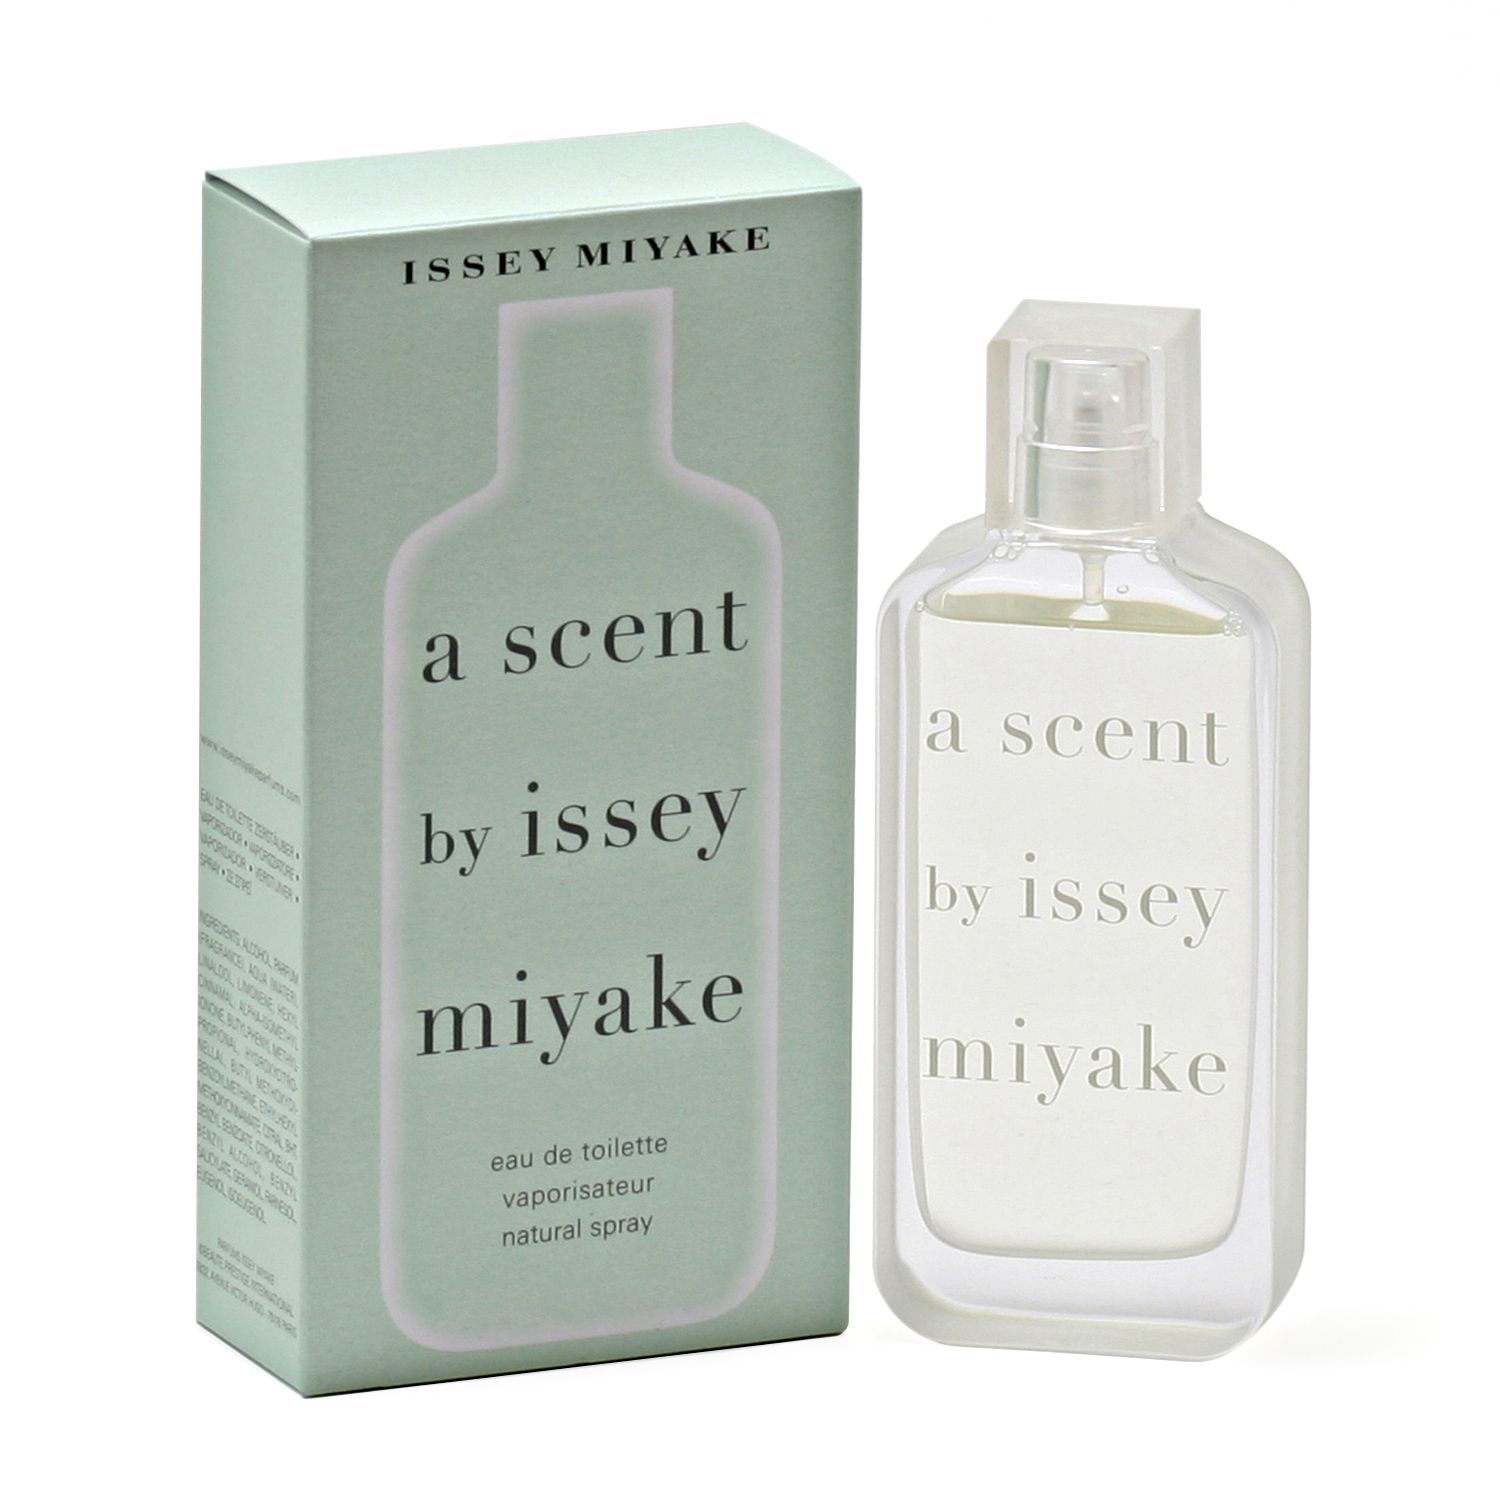 Туалетная вода issey miyake. Issey Miyake духи женские. Issey Miyake l`Eau d`Issey Florale туалетная вода 90 мл тестер. Духи Issey Miyake пробник. A Scent by Issey.